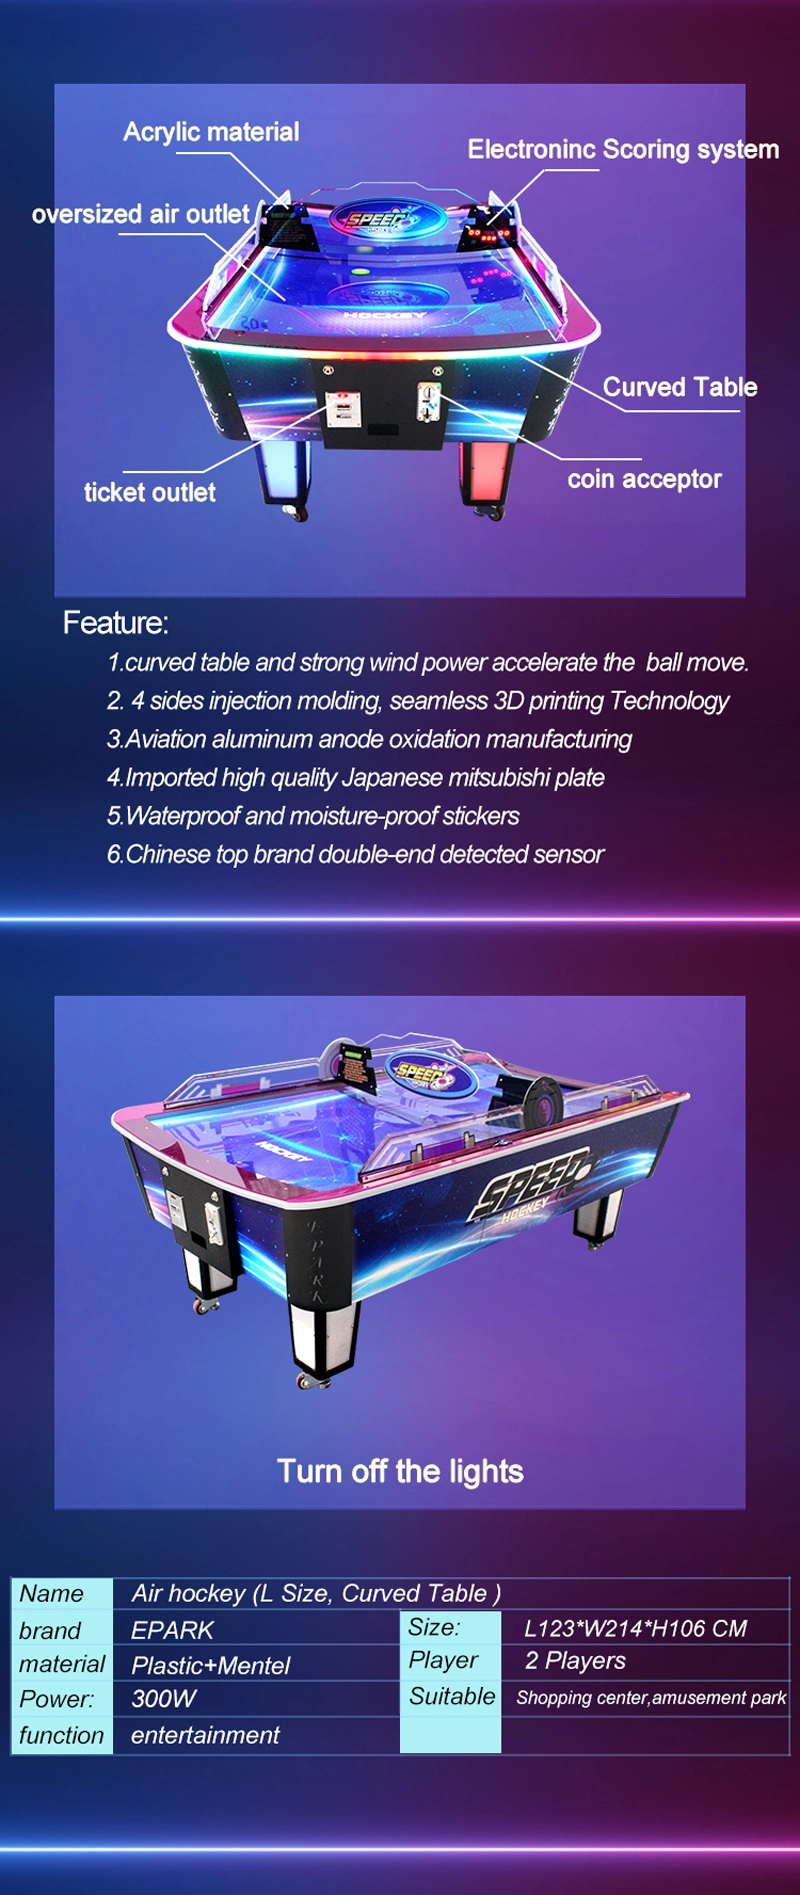 Adult Size Air Hockey Curved Table Portable Air Hockey Table Arcade Hockey Table Game Machine